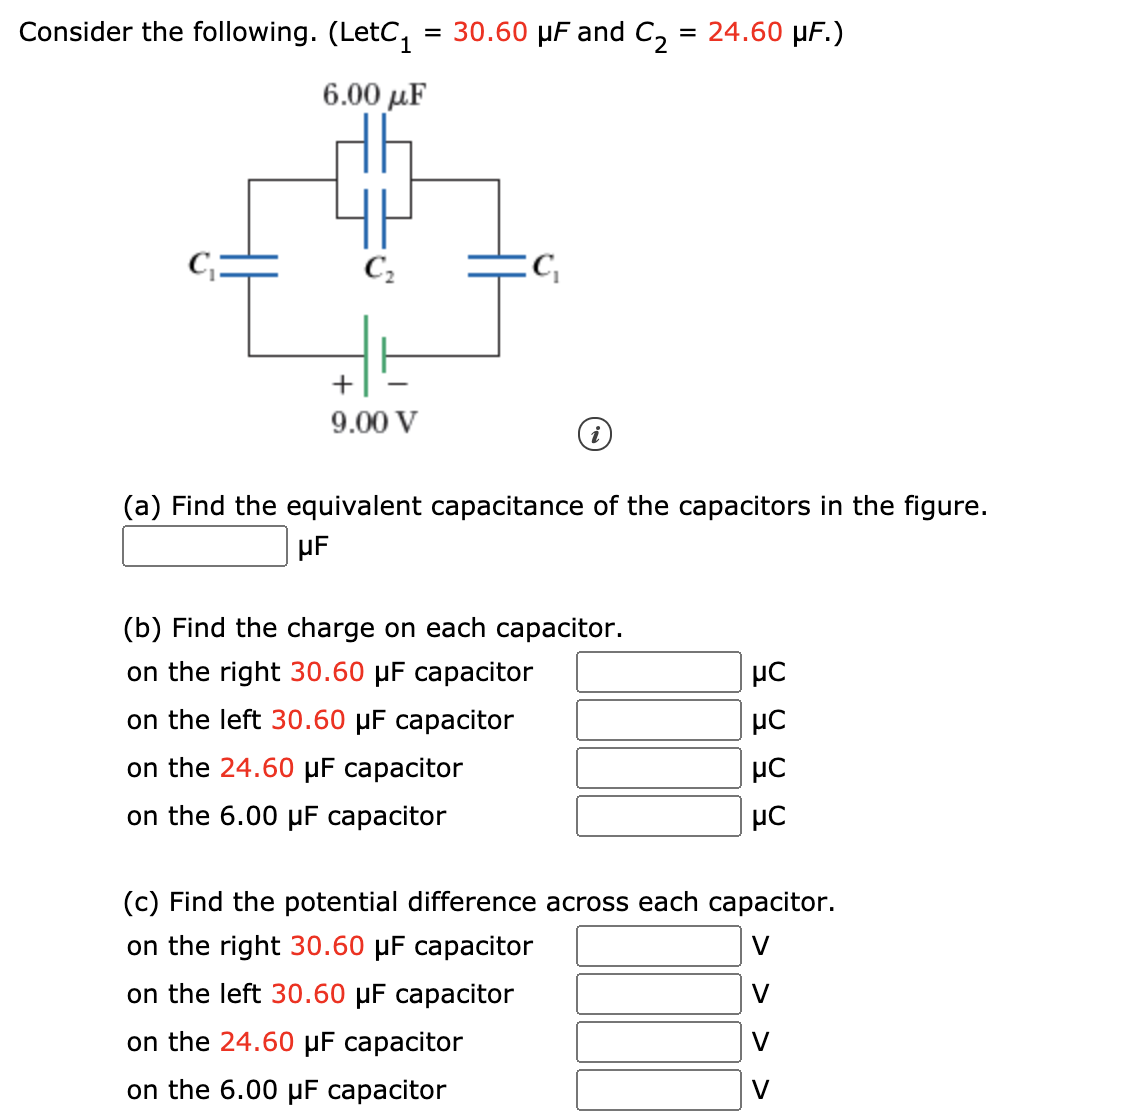 Consider the following. (LetC1
30.60 µF and C,
= 24.60 μF.)
6.00 µF
C,
+
9.00 V
(a) Find the equivalent capacitance of the capacitors in the figure.
µF
(b) Find the charge on each capacitor.
on the right 30.60 µF capacitor
on the left 30.60 µF capacitor
on the 24.60 µF capacitor
on the 6.00 µF capacitor
(c) Find the potential difference across each capacitor.
on the right 30.60 µF capacitor
V
on the left 30.60 µF capacitor
V
on the 24.60 µF capacitor
V
on the 6.00 µF capacitor
V
